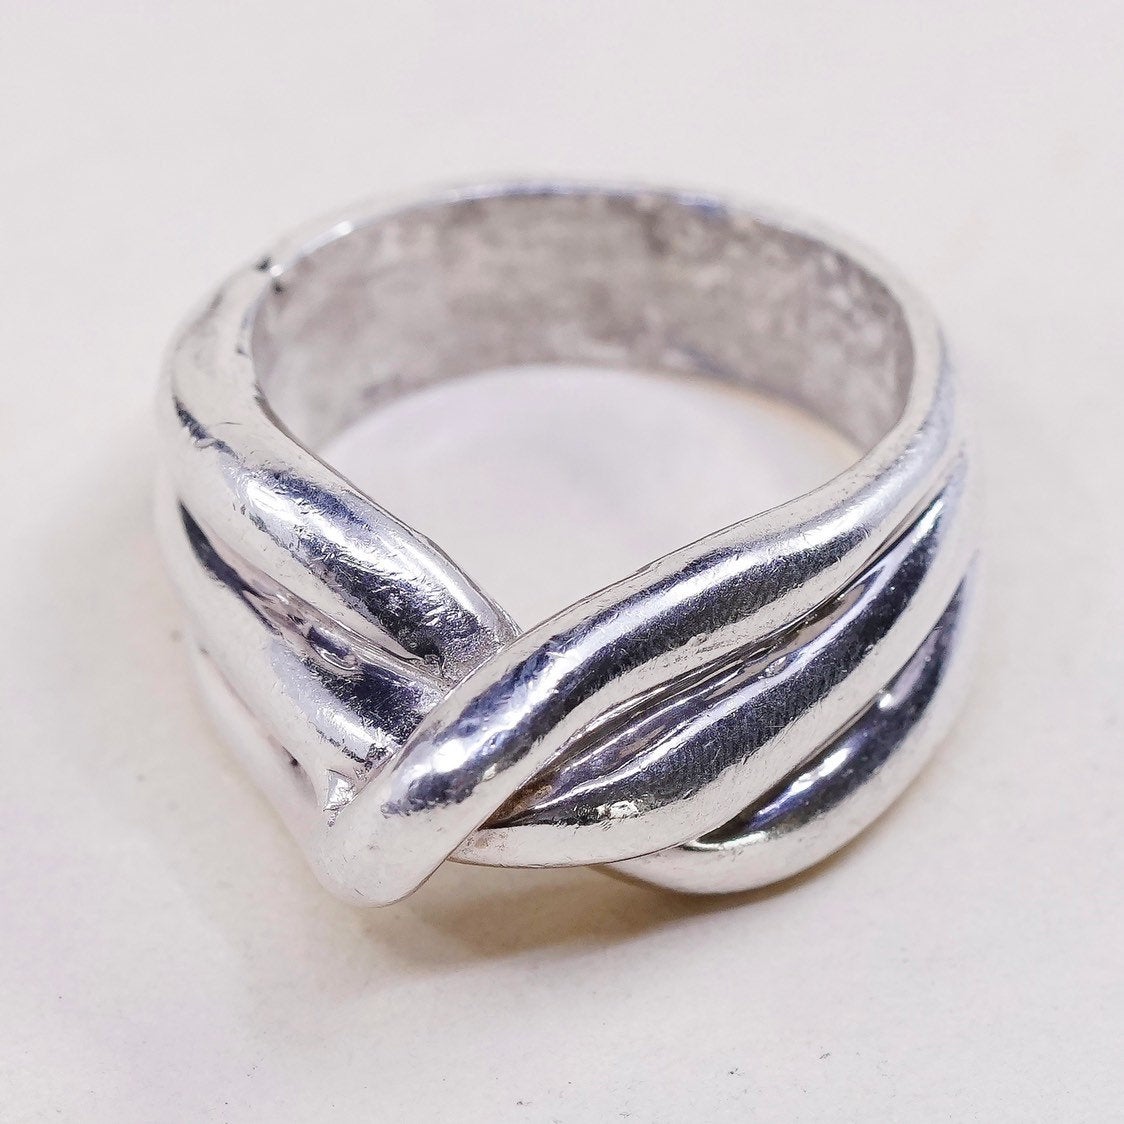 sz 8, vtg sterling silver handmade ring, Mexico 925 ribbed statement band